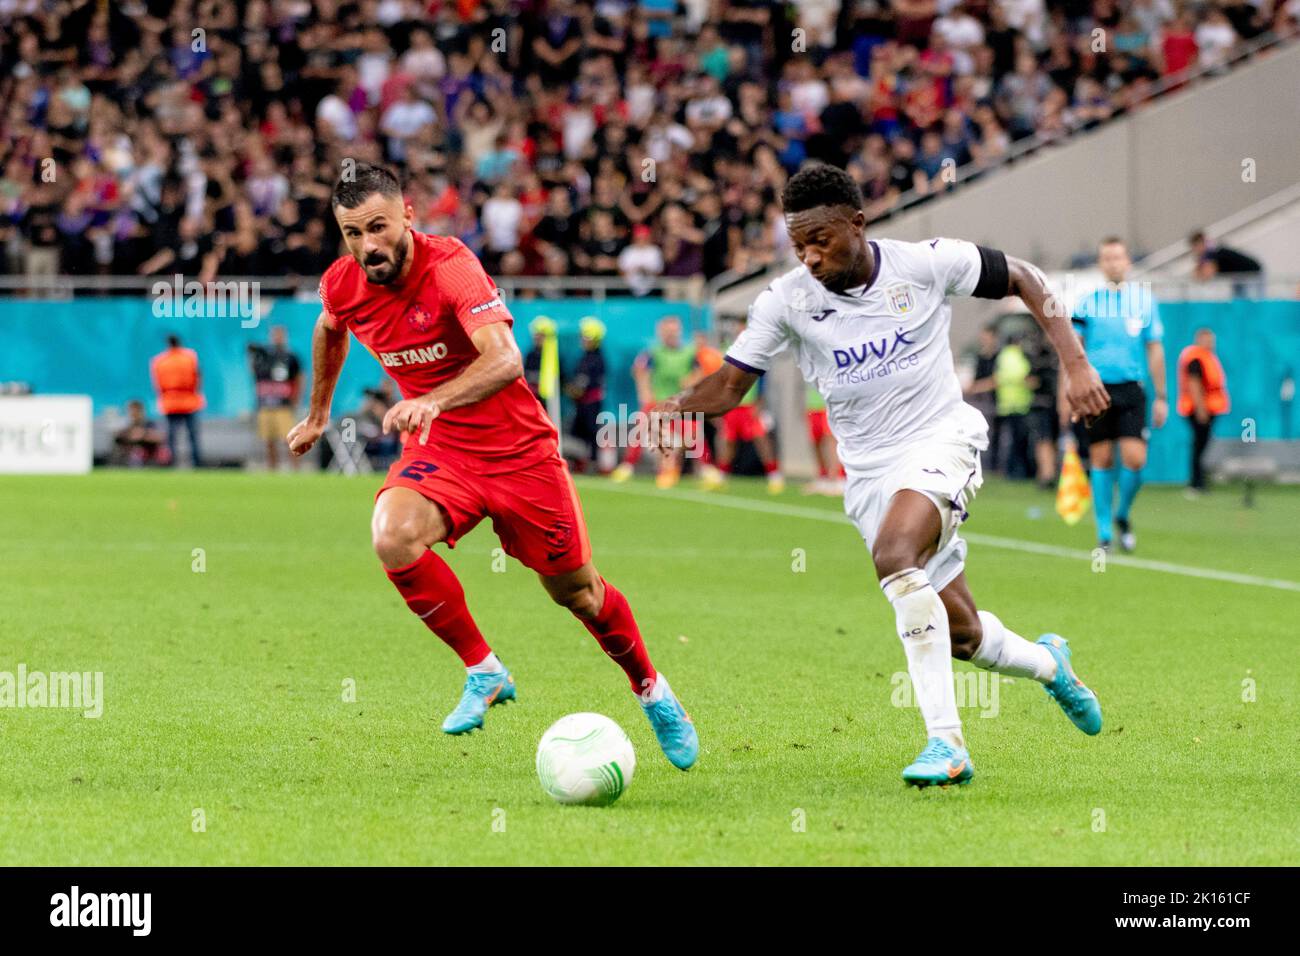 Bucharest, Romania. 15th Sep, 2022. September 15, 2022: Valentin Cretu #2 of FCSB and Francis Amuzu #7 of RSC Anderlecht during of the UEFA Europa Conference League group B match between FCSB Bucharest and RSC Anderlecht at National Arena Stadium in Bucharest, Romania ROU. Catalin Soare/Cronos Credit: Cronos/Alamy Live News Stock Photo